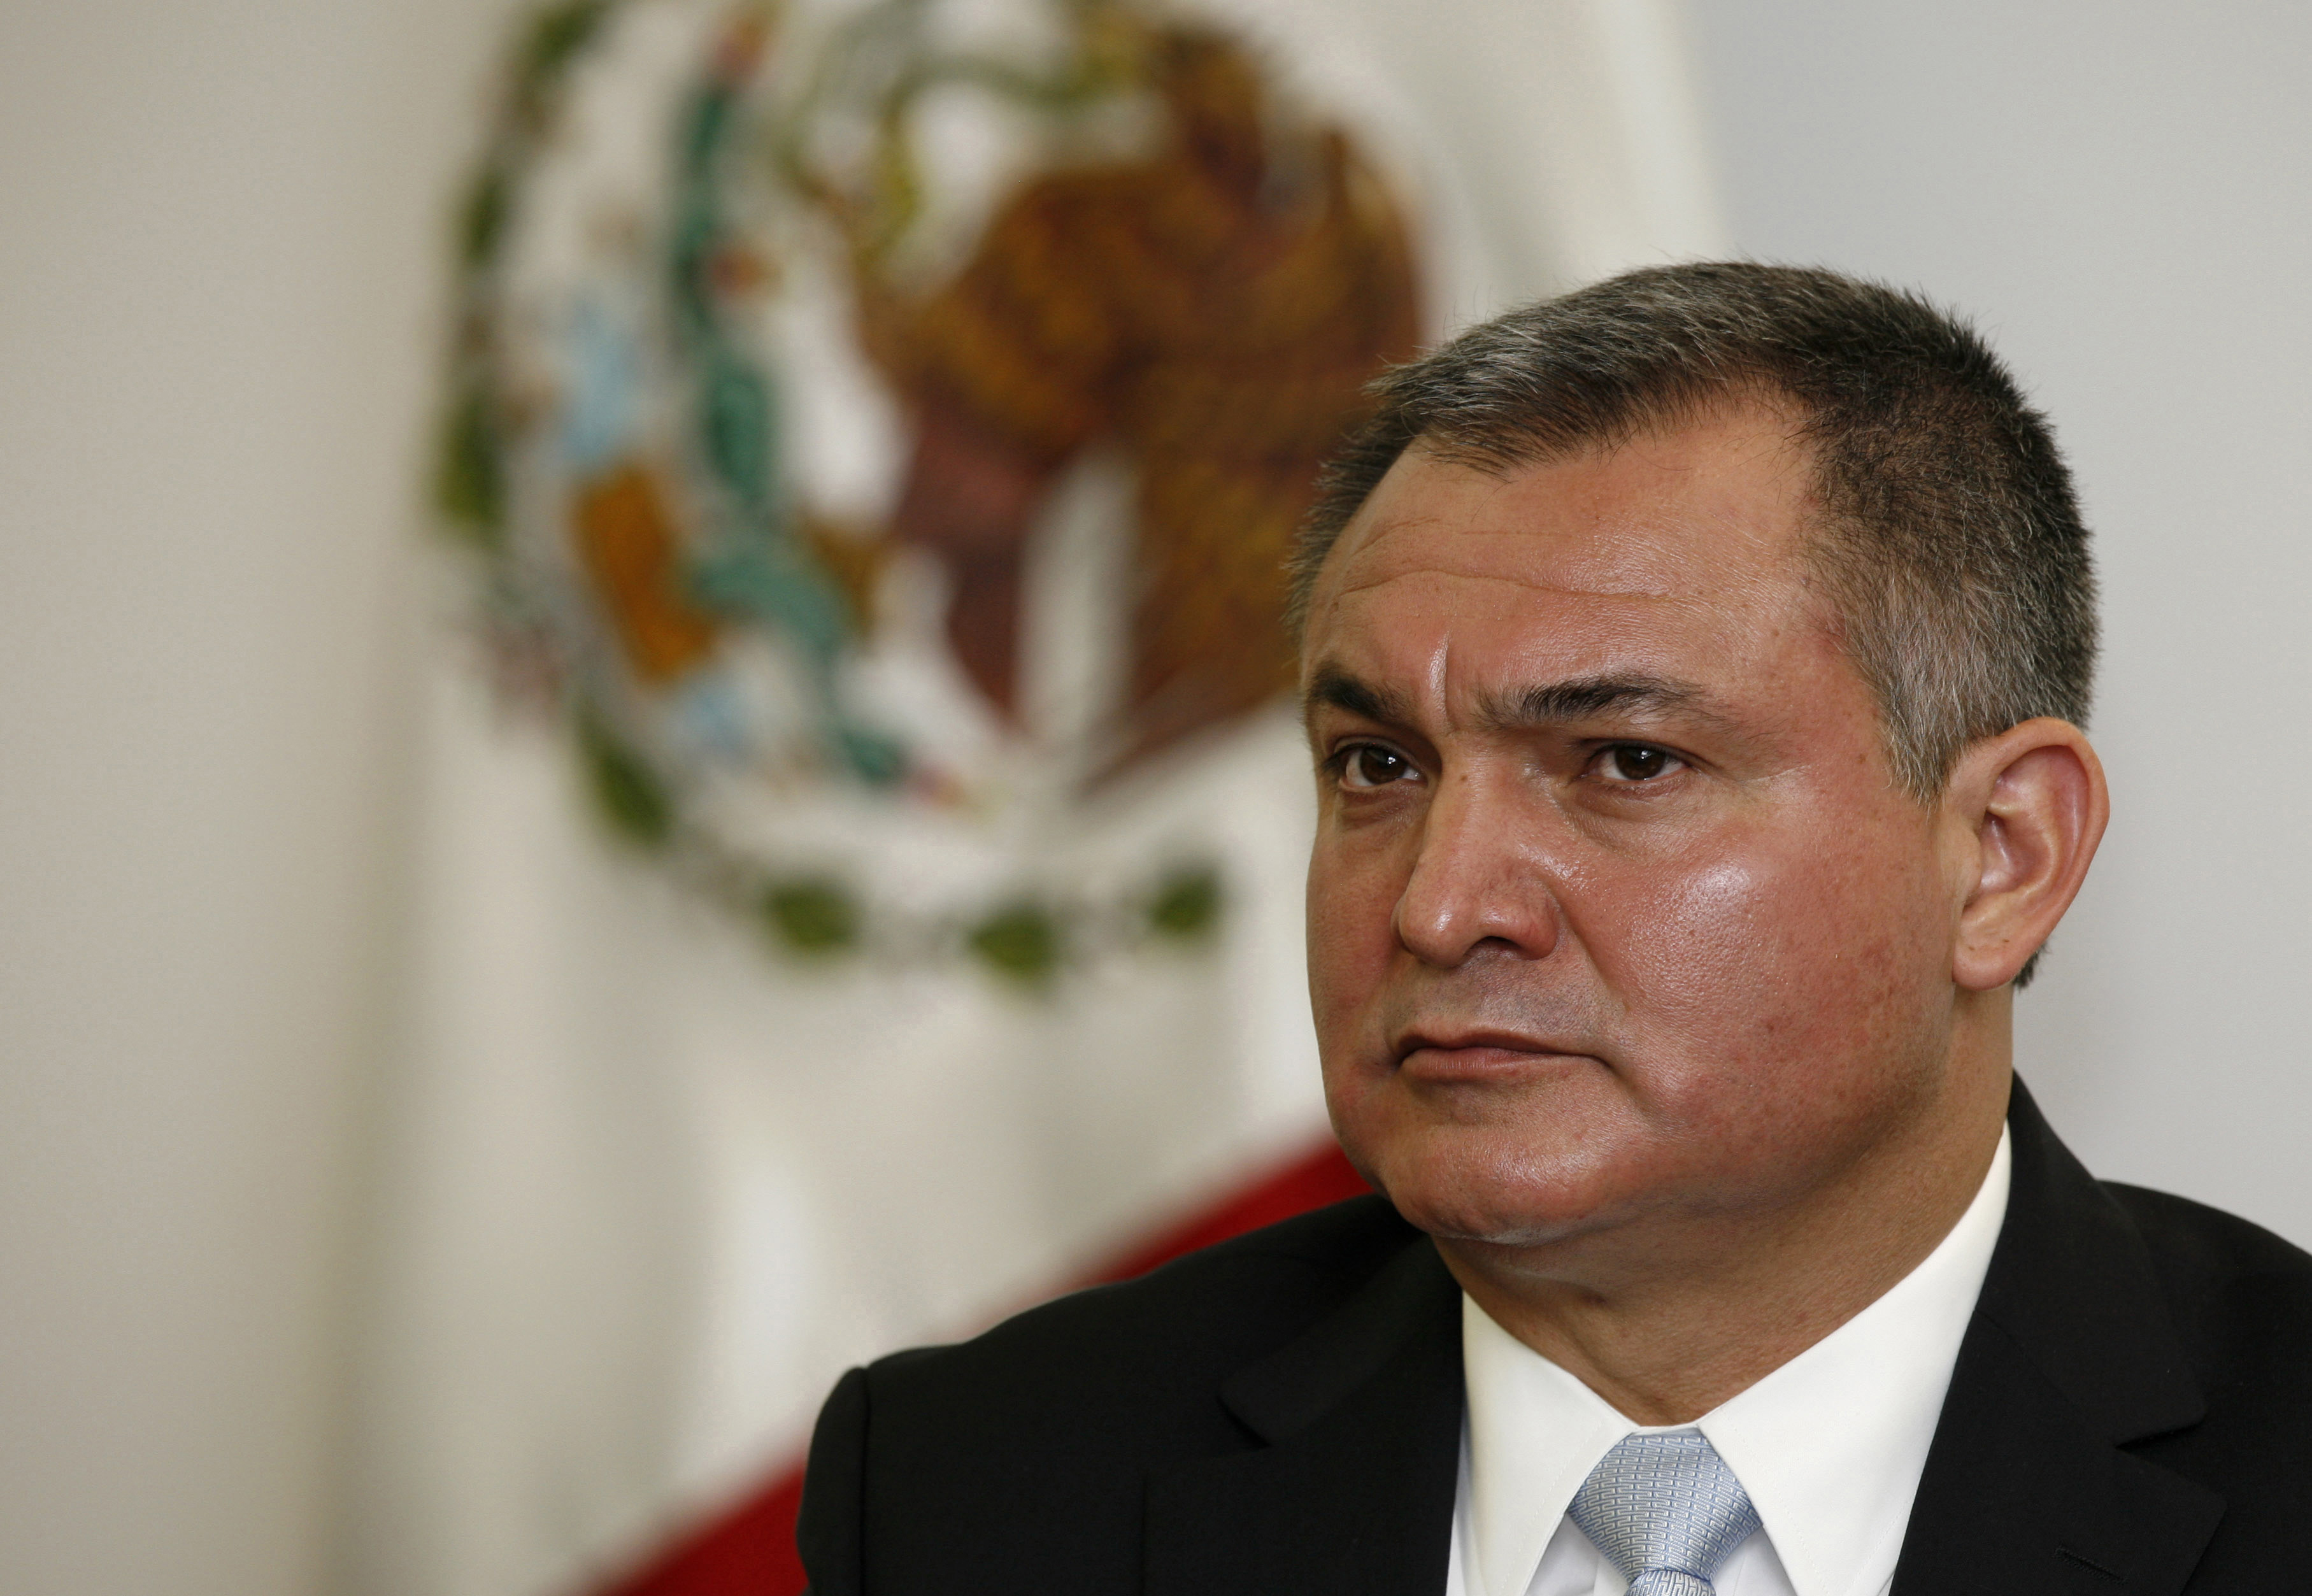 File photo of Mexico's Secretary of Public Security, Genaro García Luna, at a press conference on the sidelines of the American Police Community meeting in Mexico City on October 8, 2010. (AP Photo/Marco Ugarte, File)